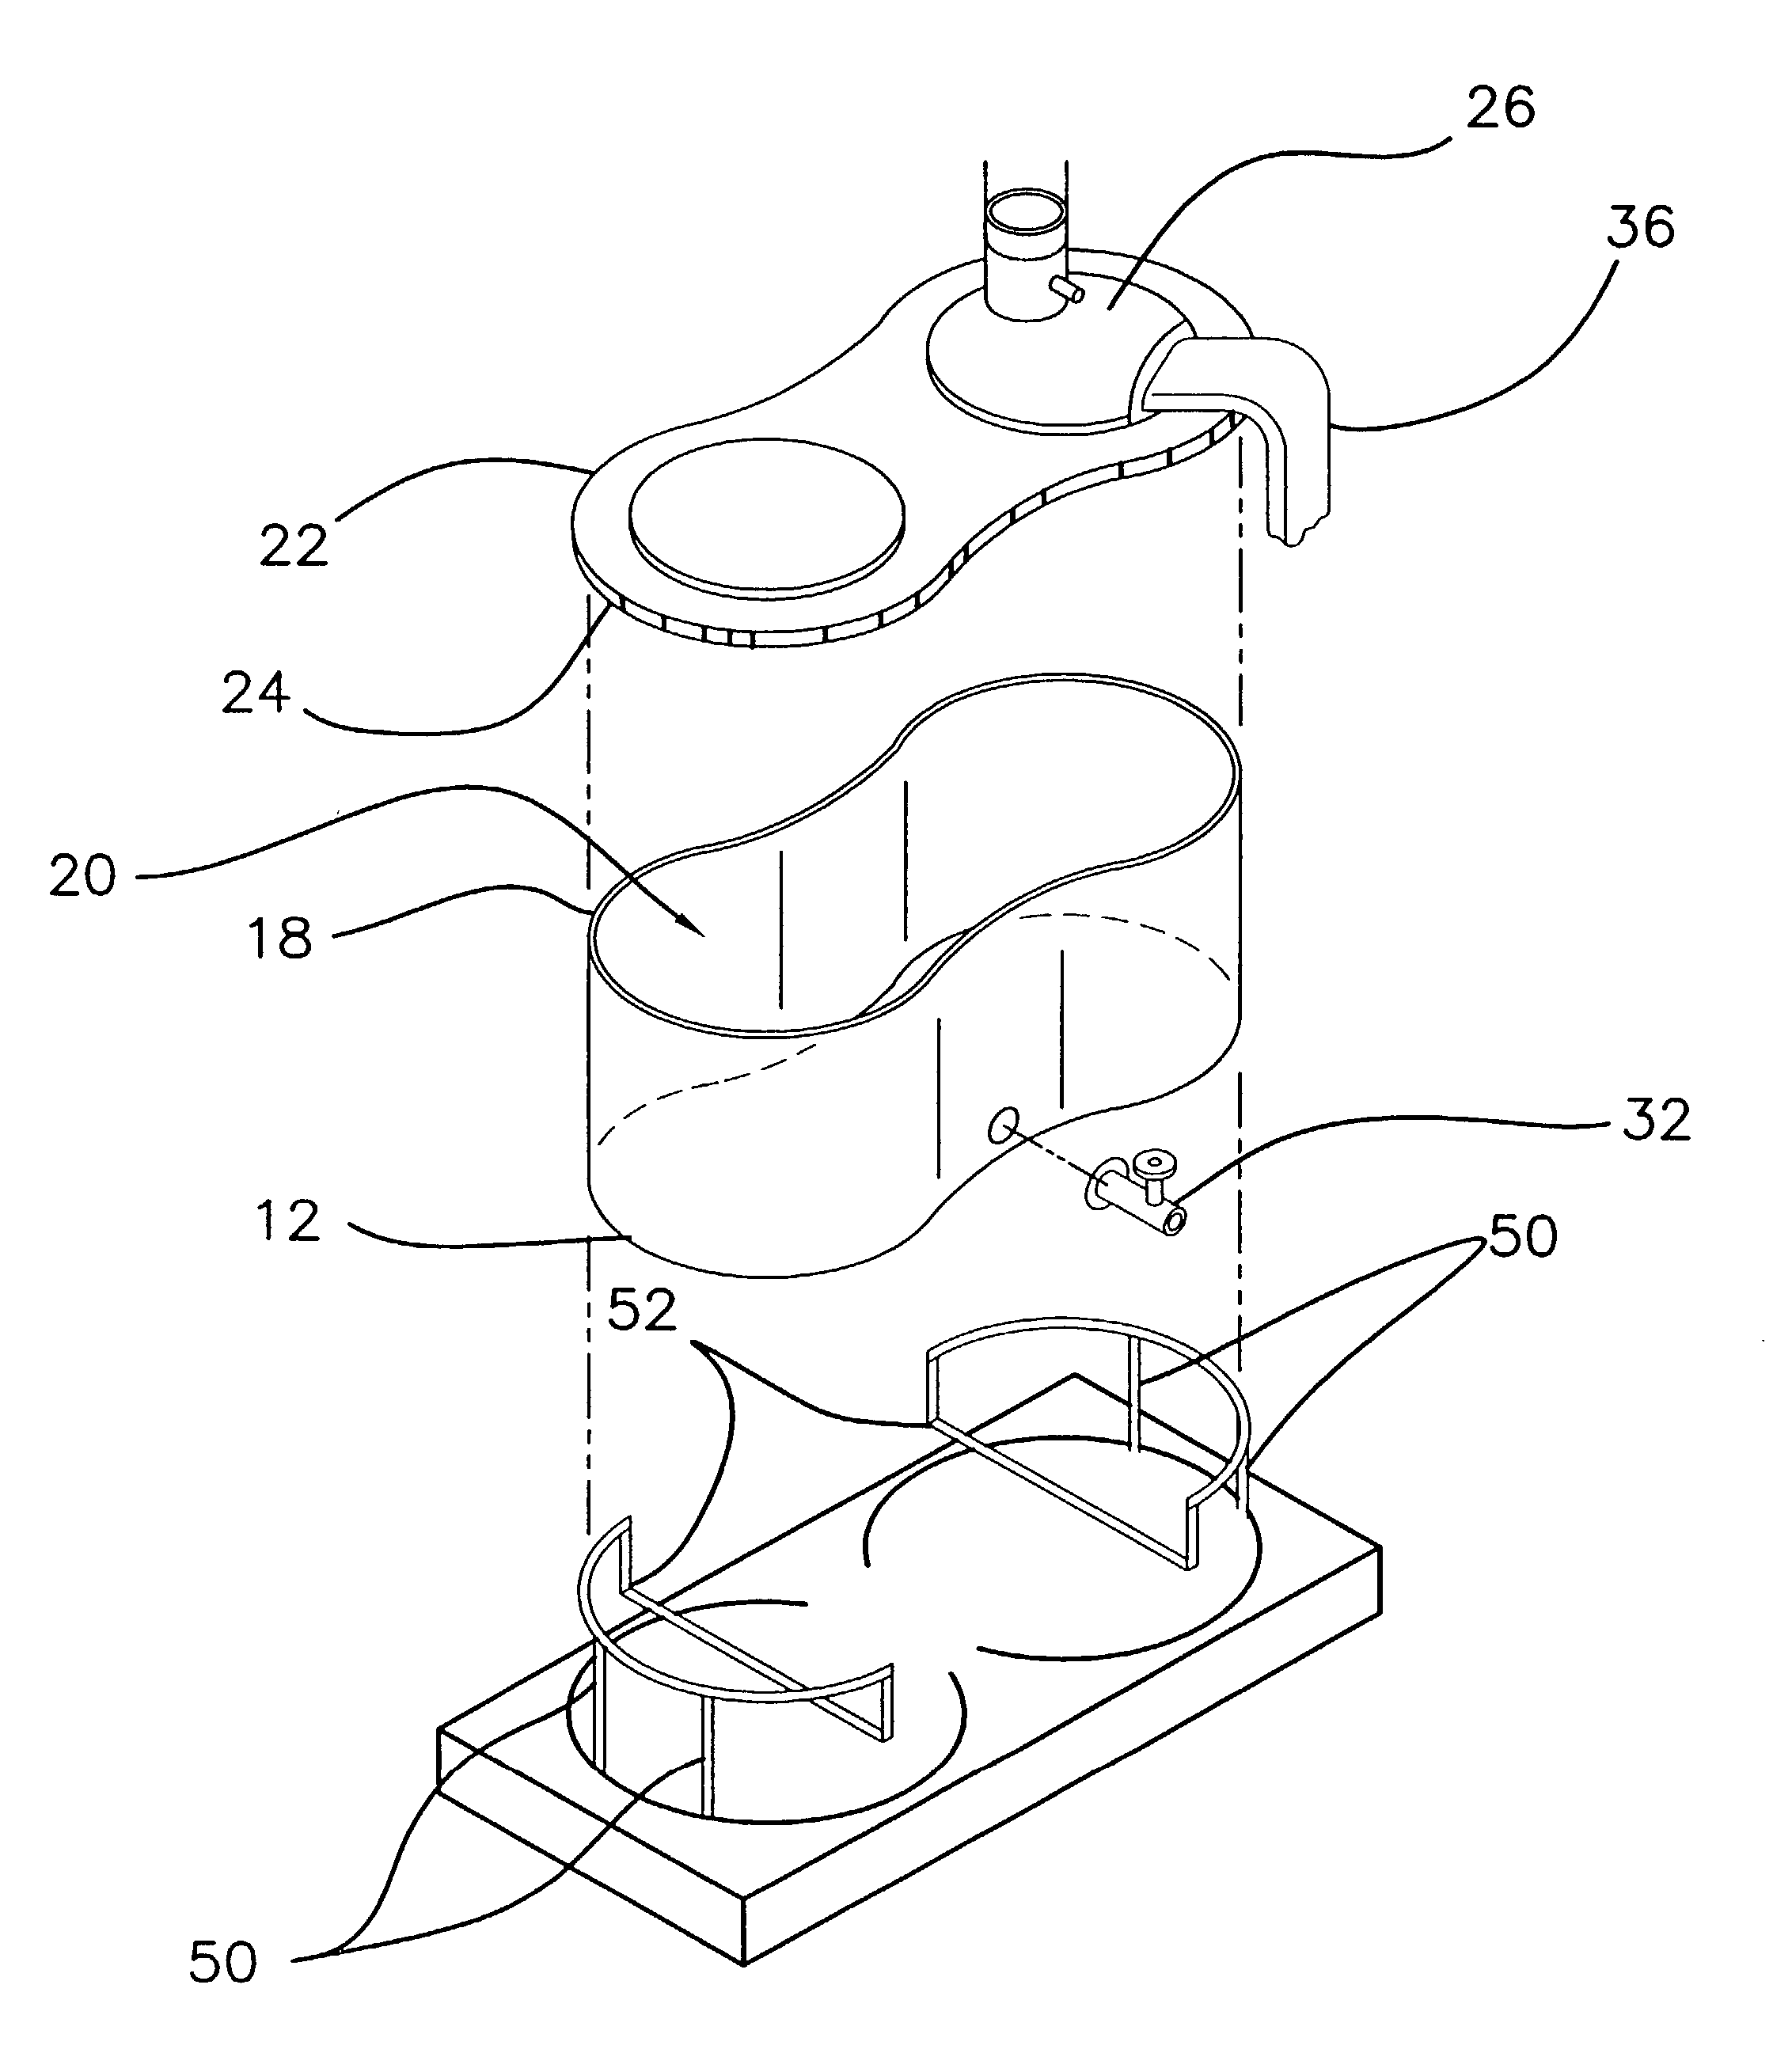 Rainwater collection device